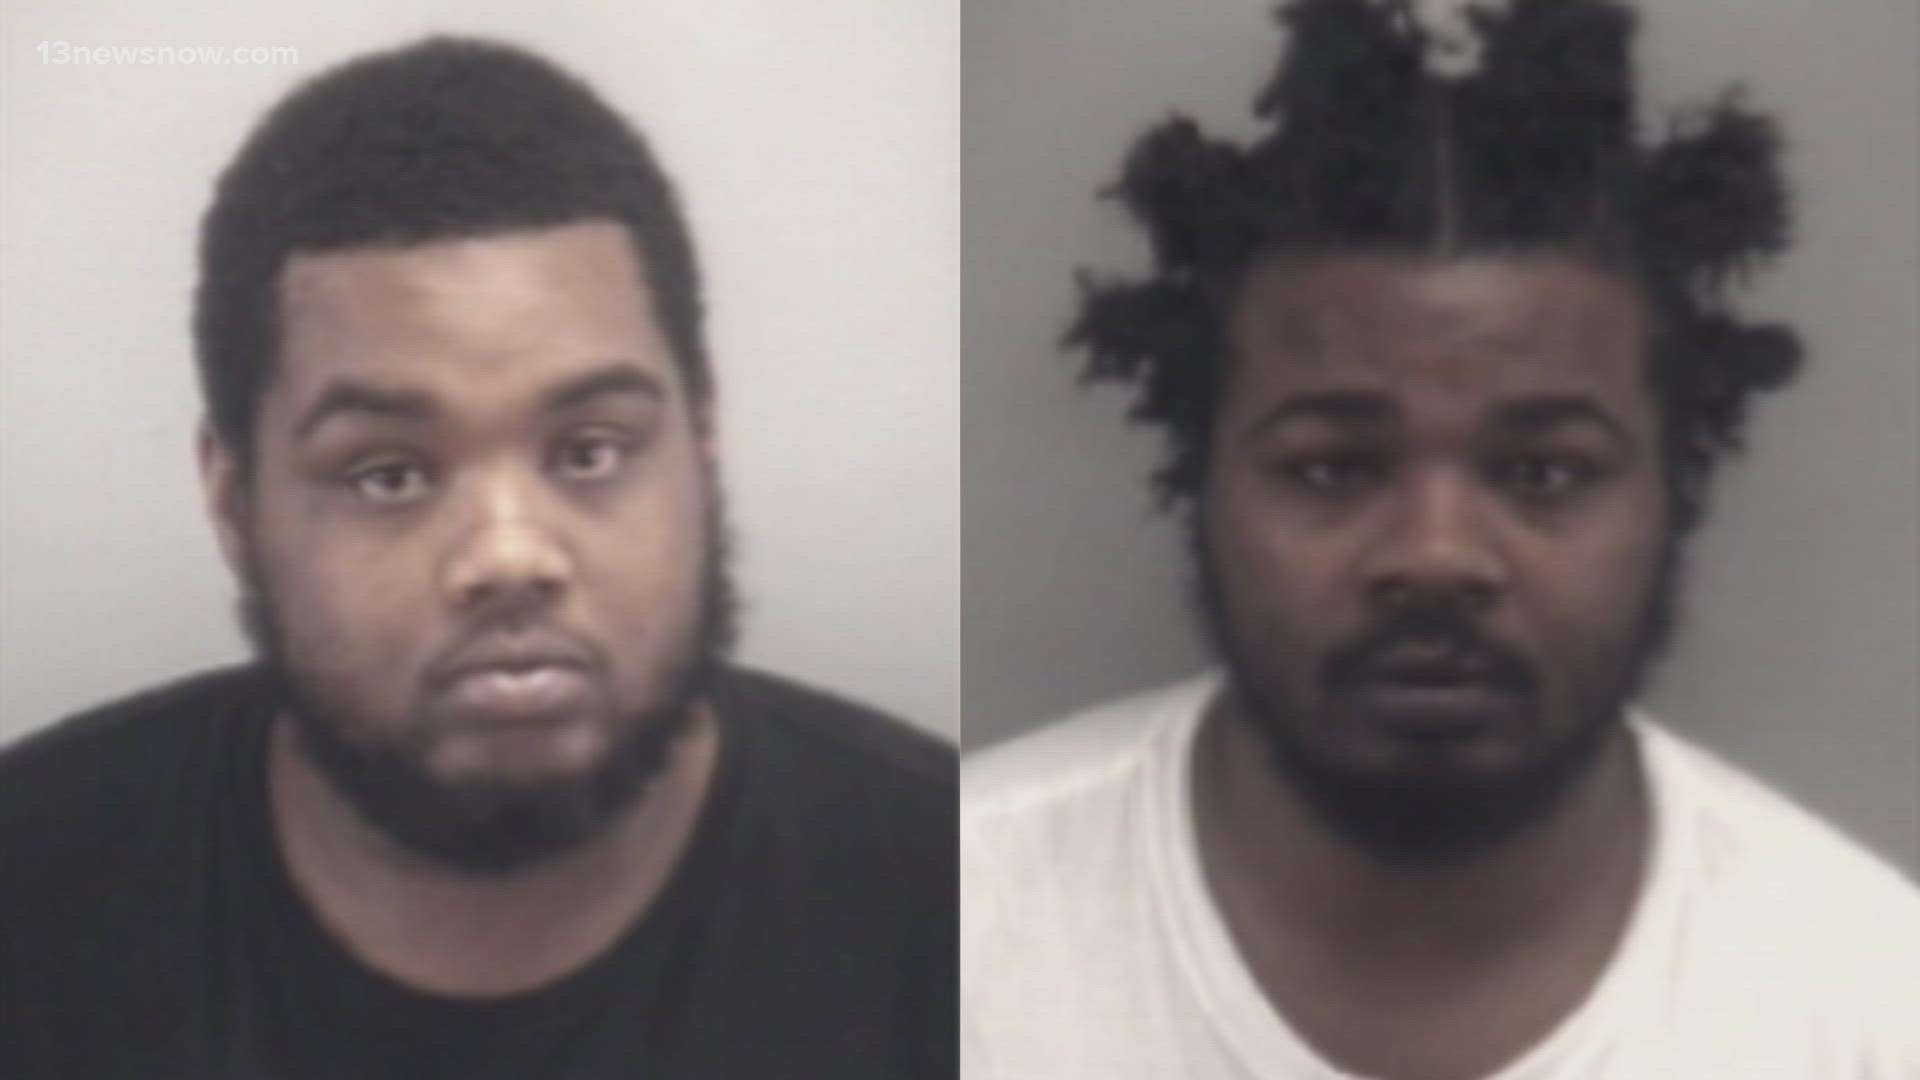 A grand jury indicted Quayshon and Saiqhon Jordan on shooting at an occupied car and gun charges.